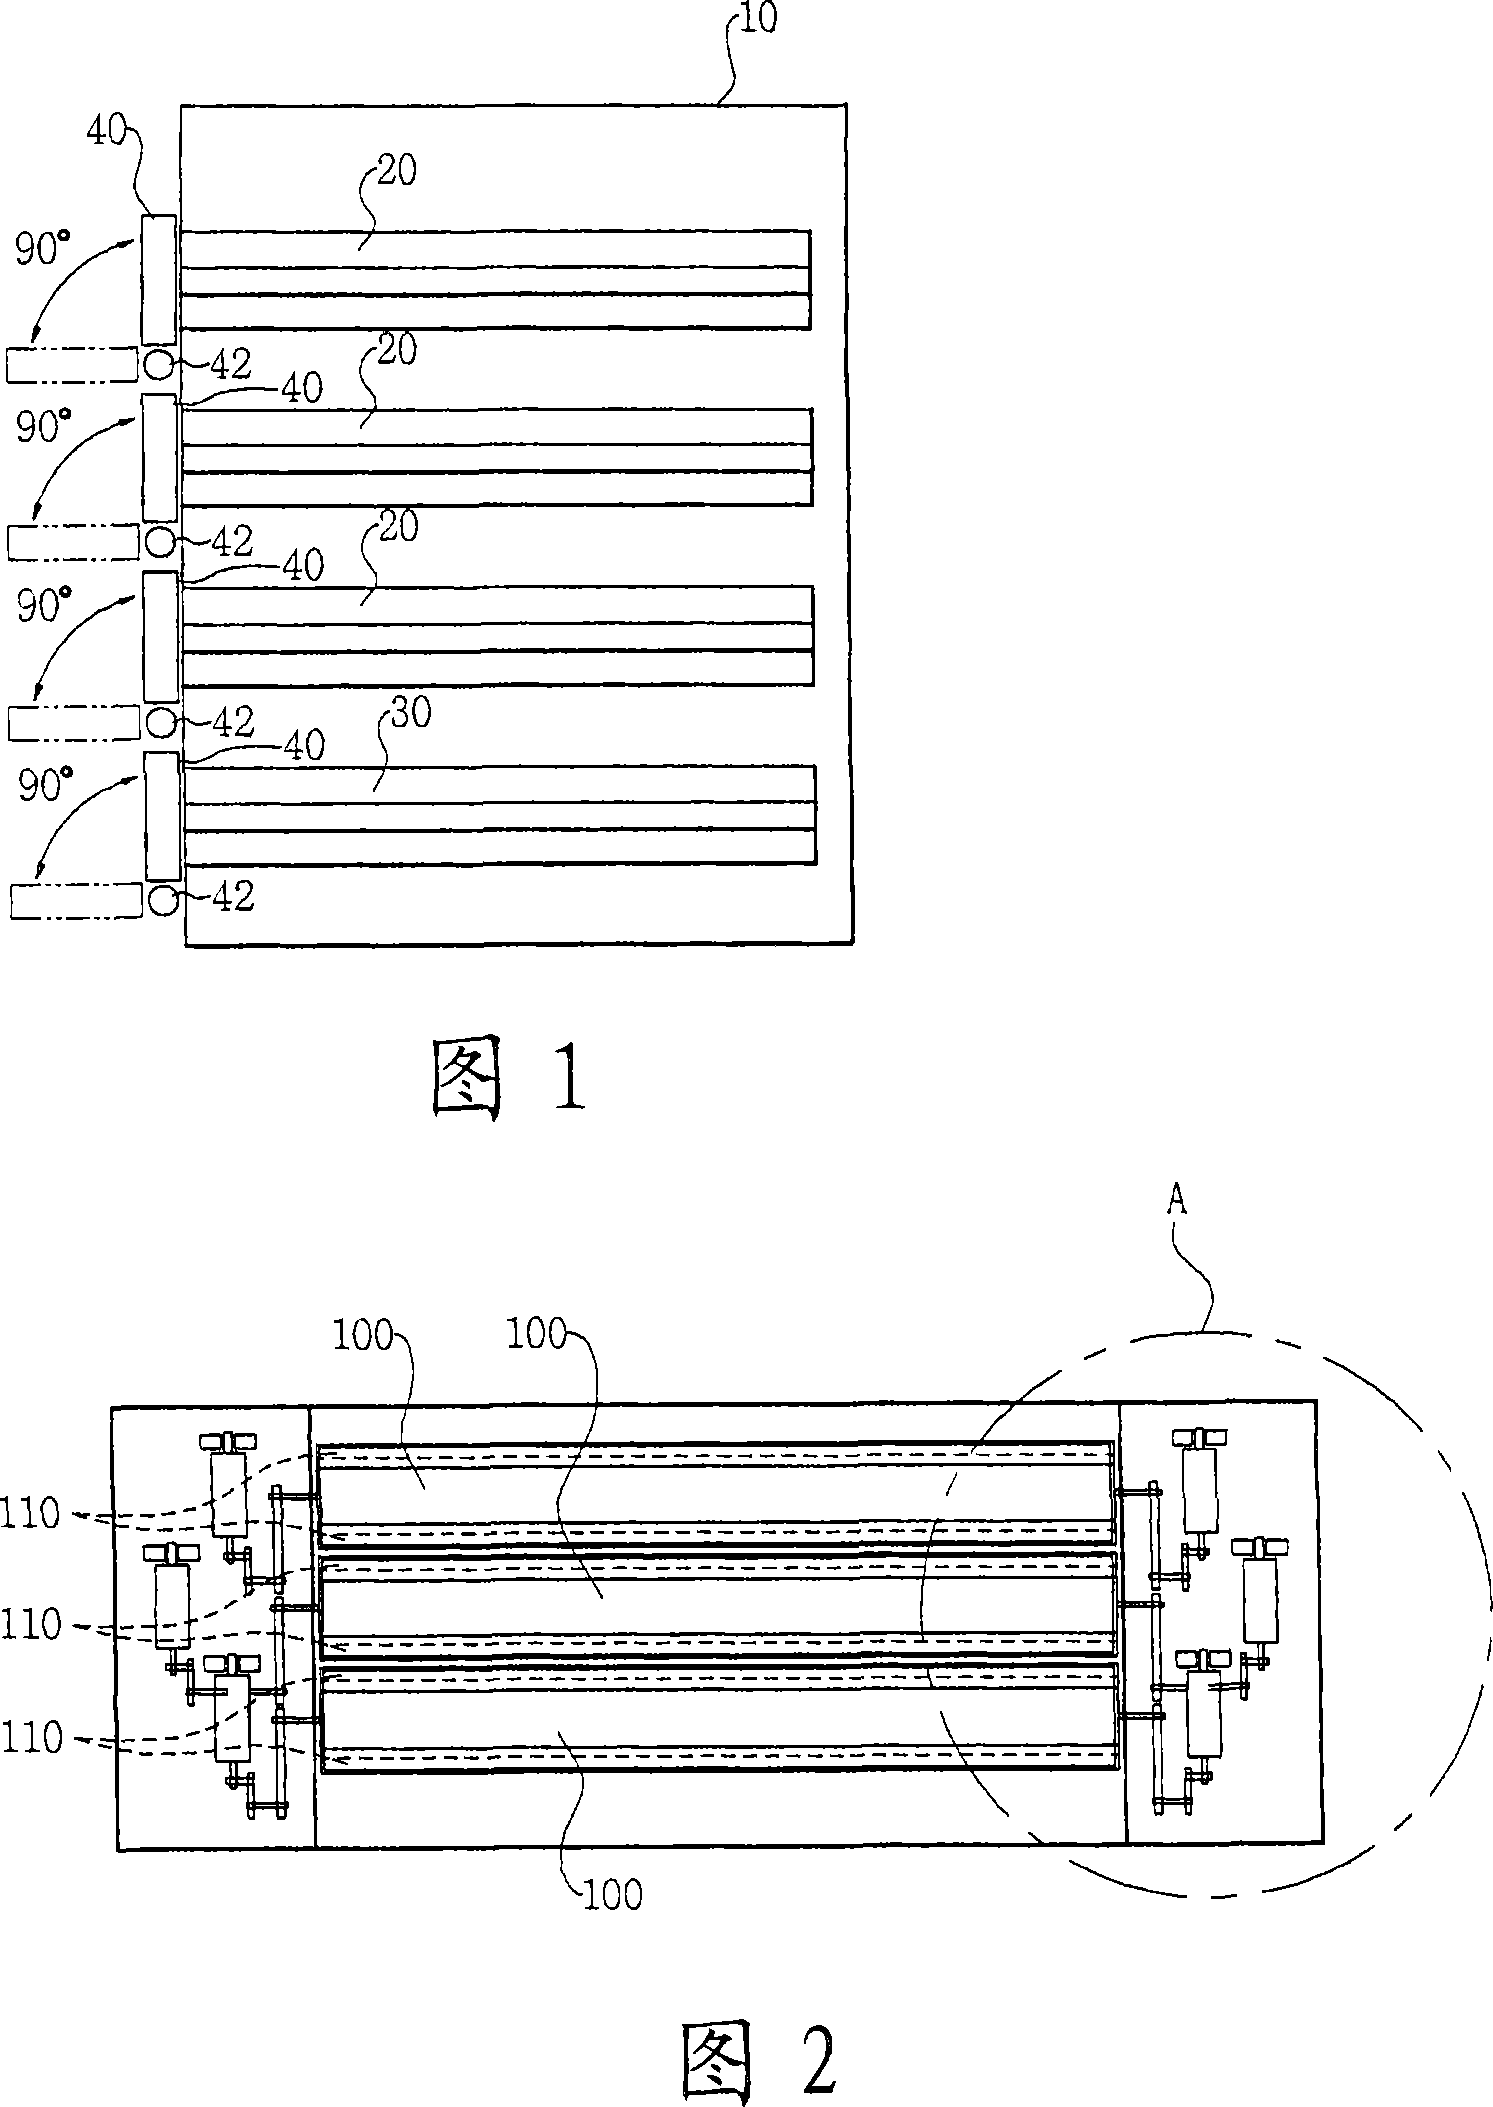 LCD glass oven system door and apparatus for controlling the same